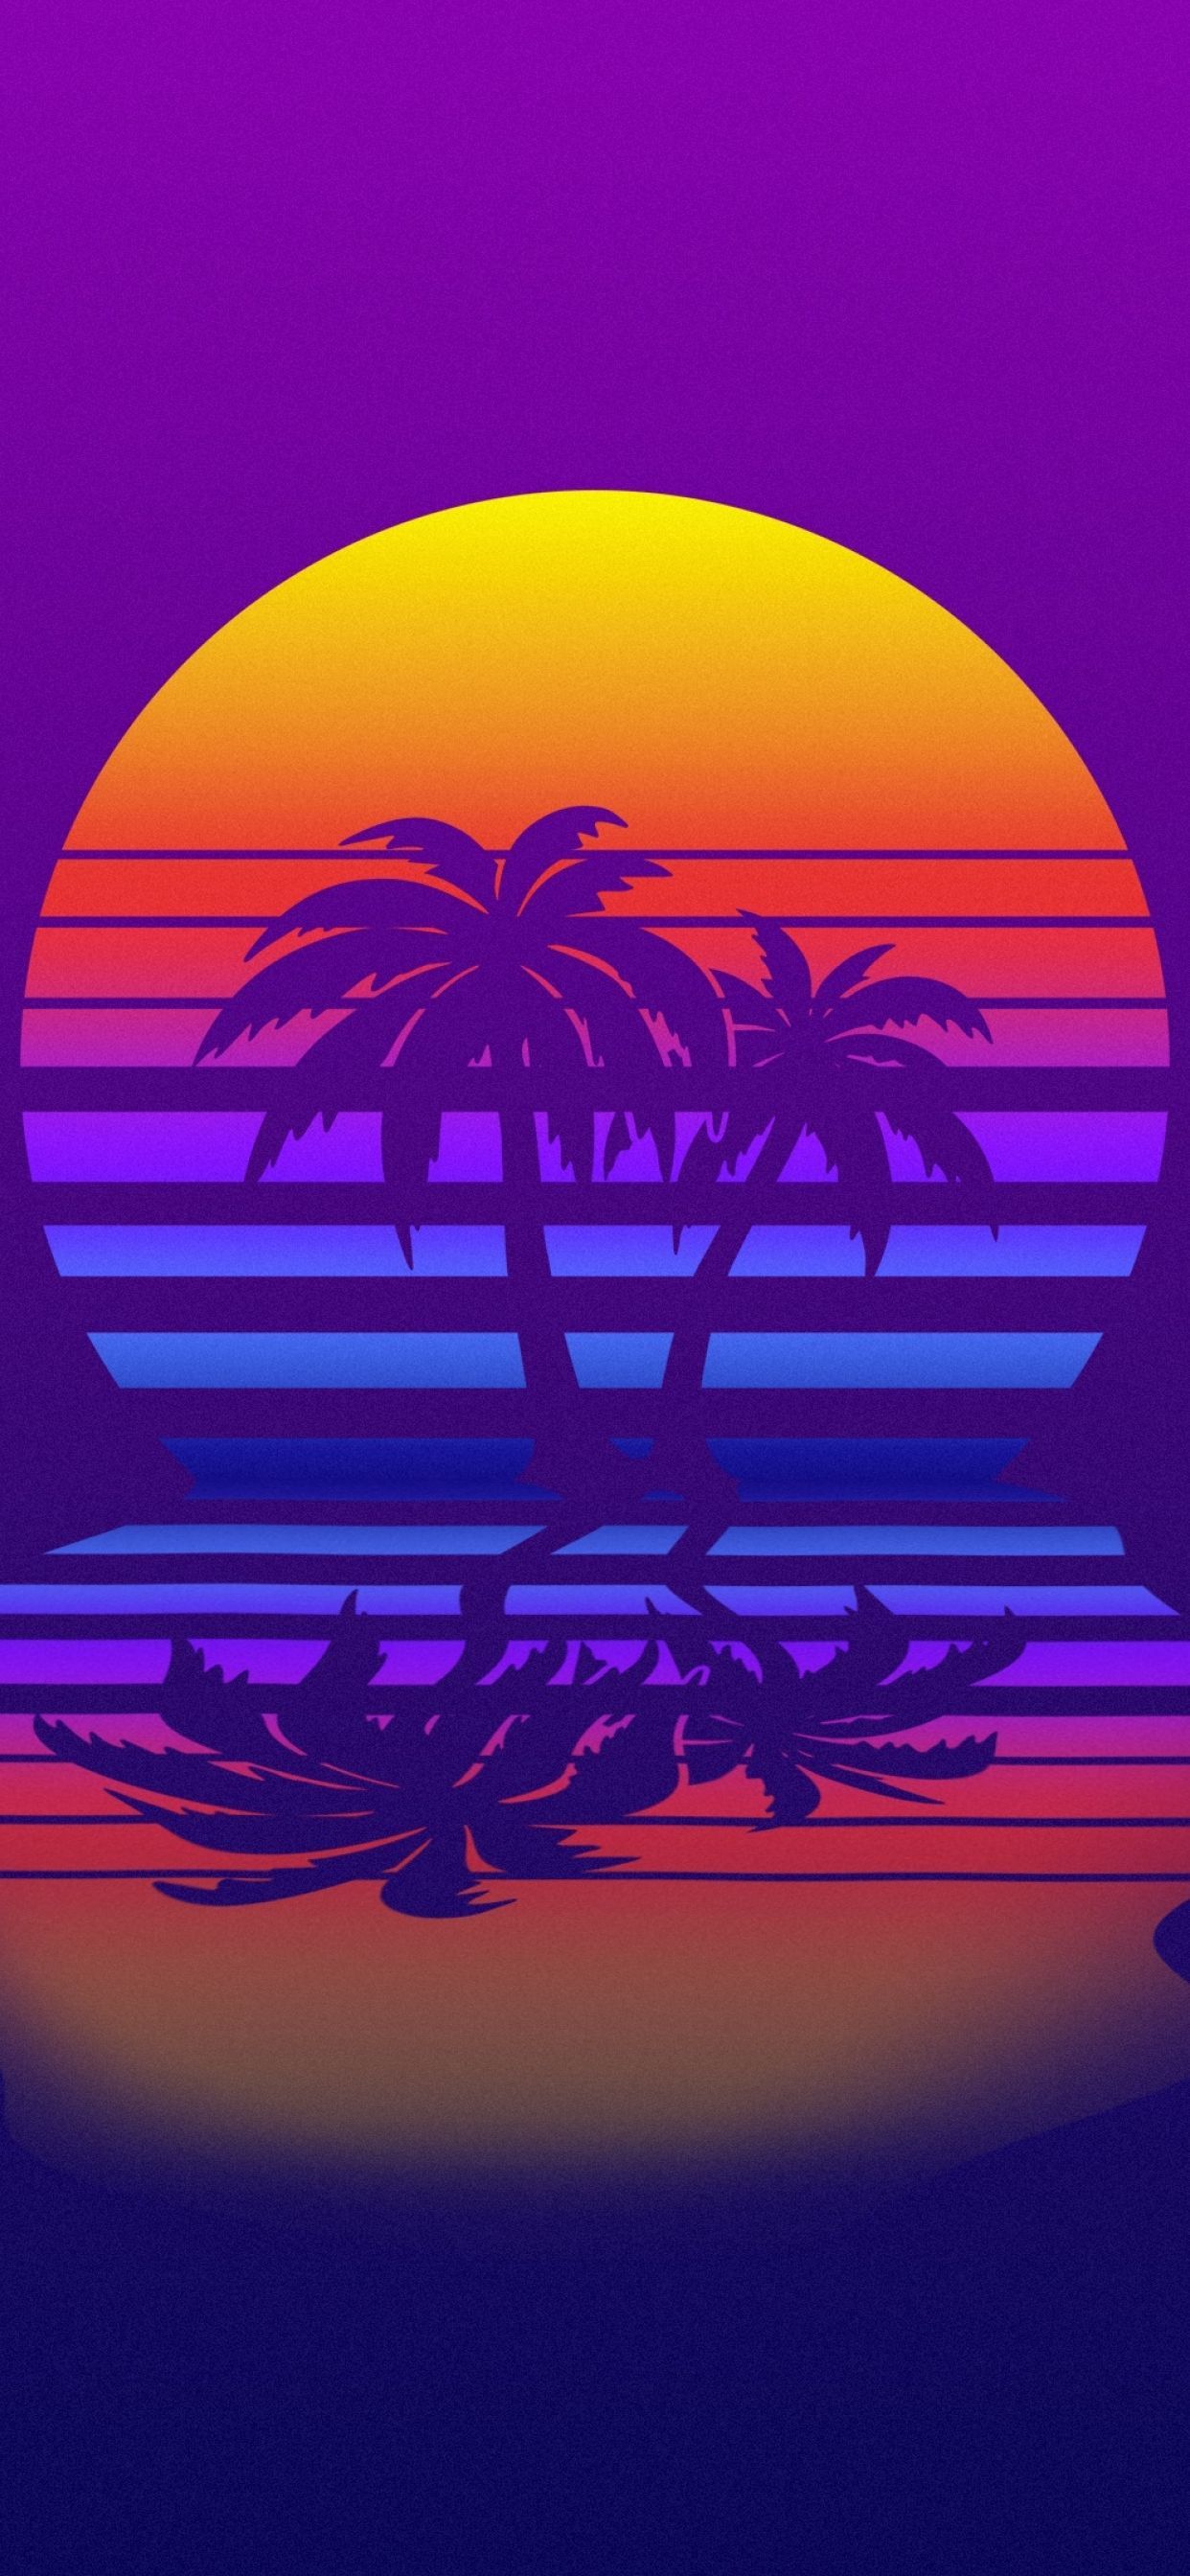 Synthwave iPhone Wallpaper Free Synthwave iPhone Background